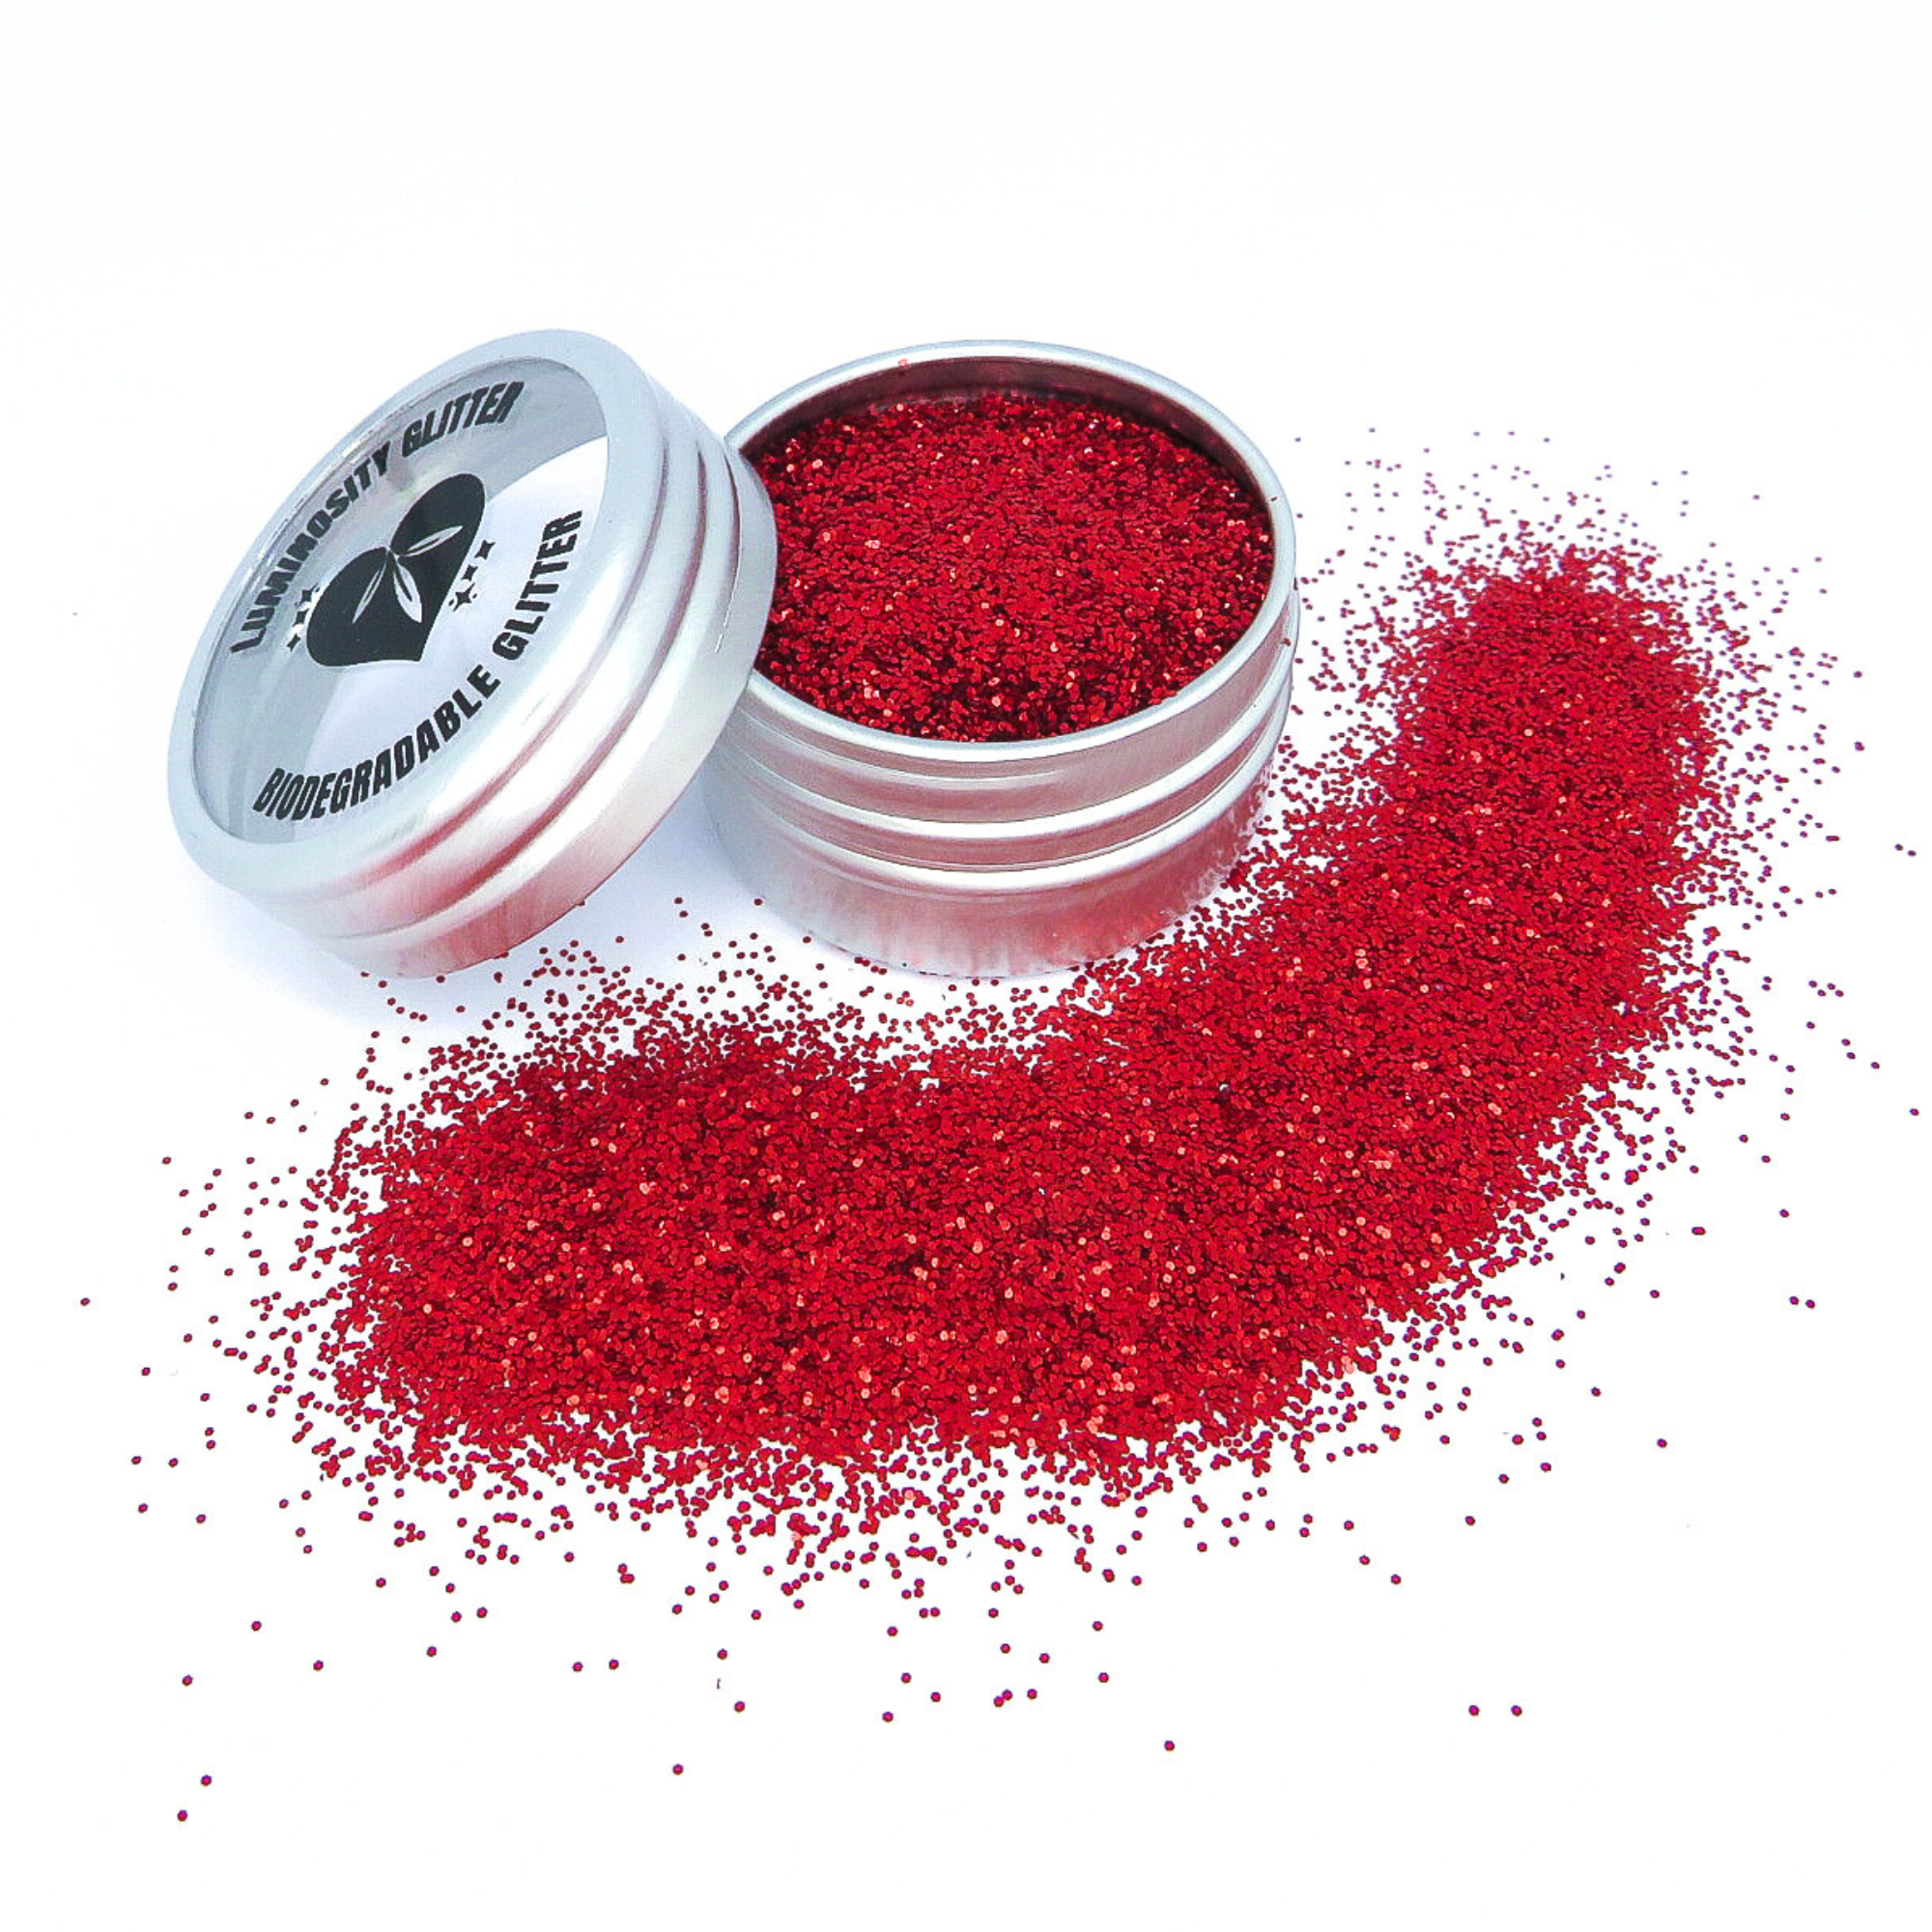 A bold shade of Ruby red biodegradable glitter